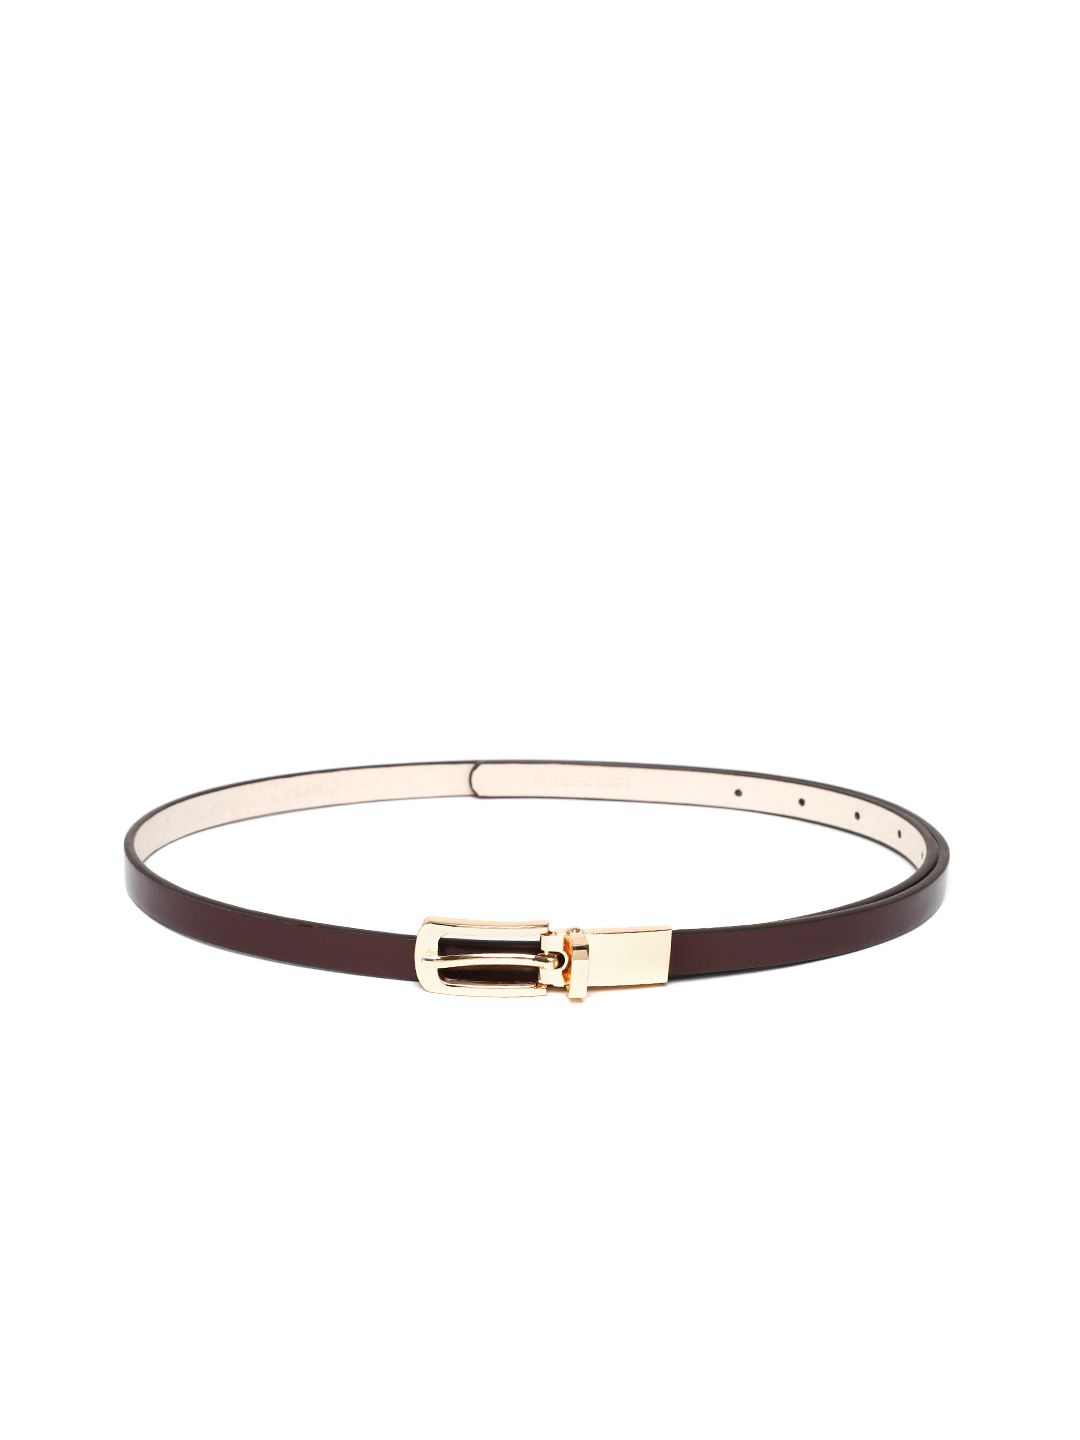 Lino Perros Women Coffee Brown Solid Belt Price in India